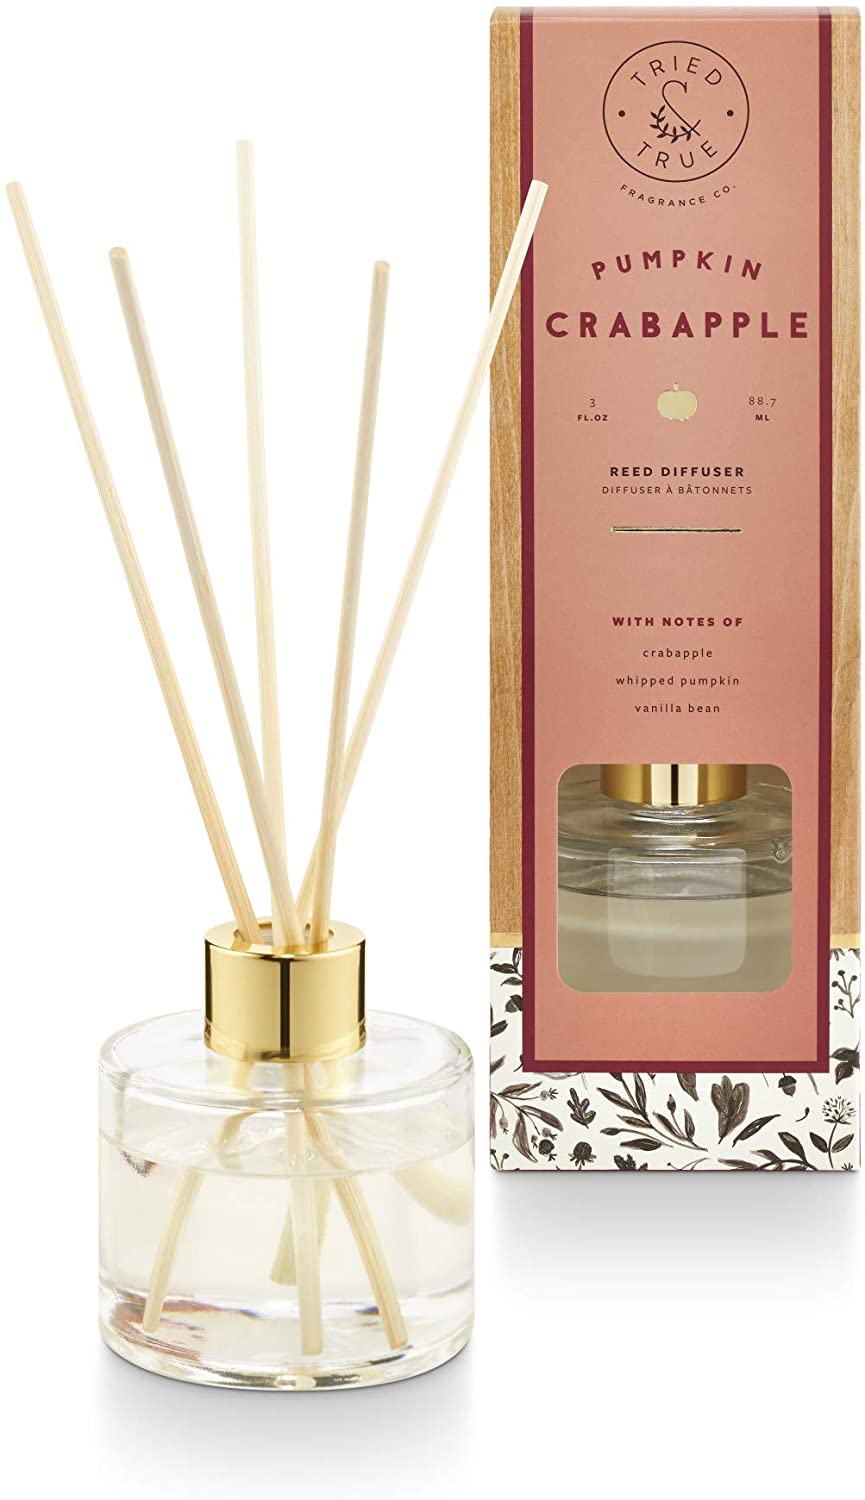 Tried & True Reed Diffuser - In Store Pickup Only - Sophie